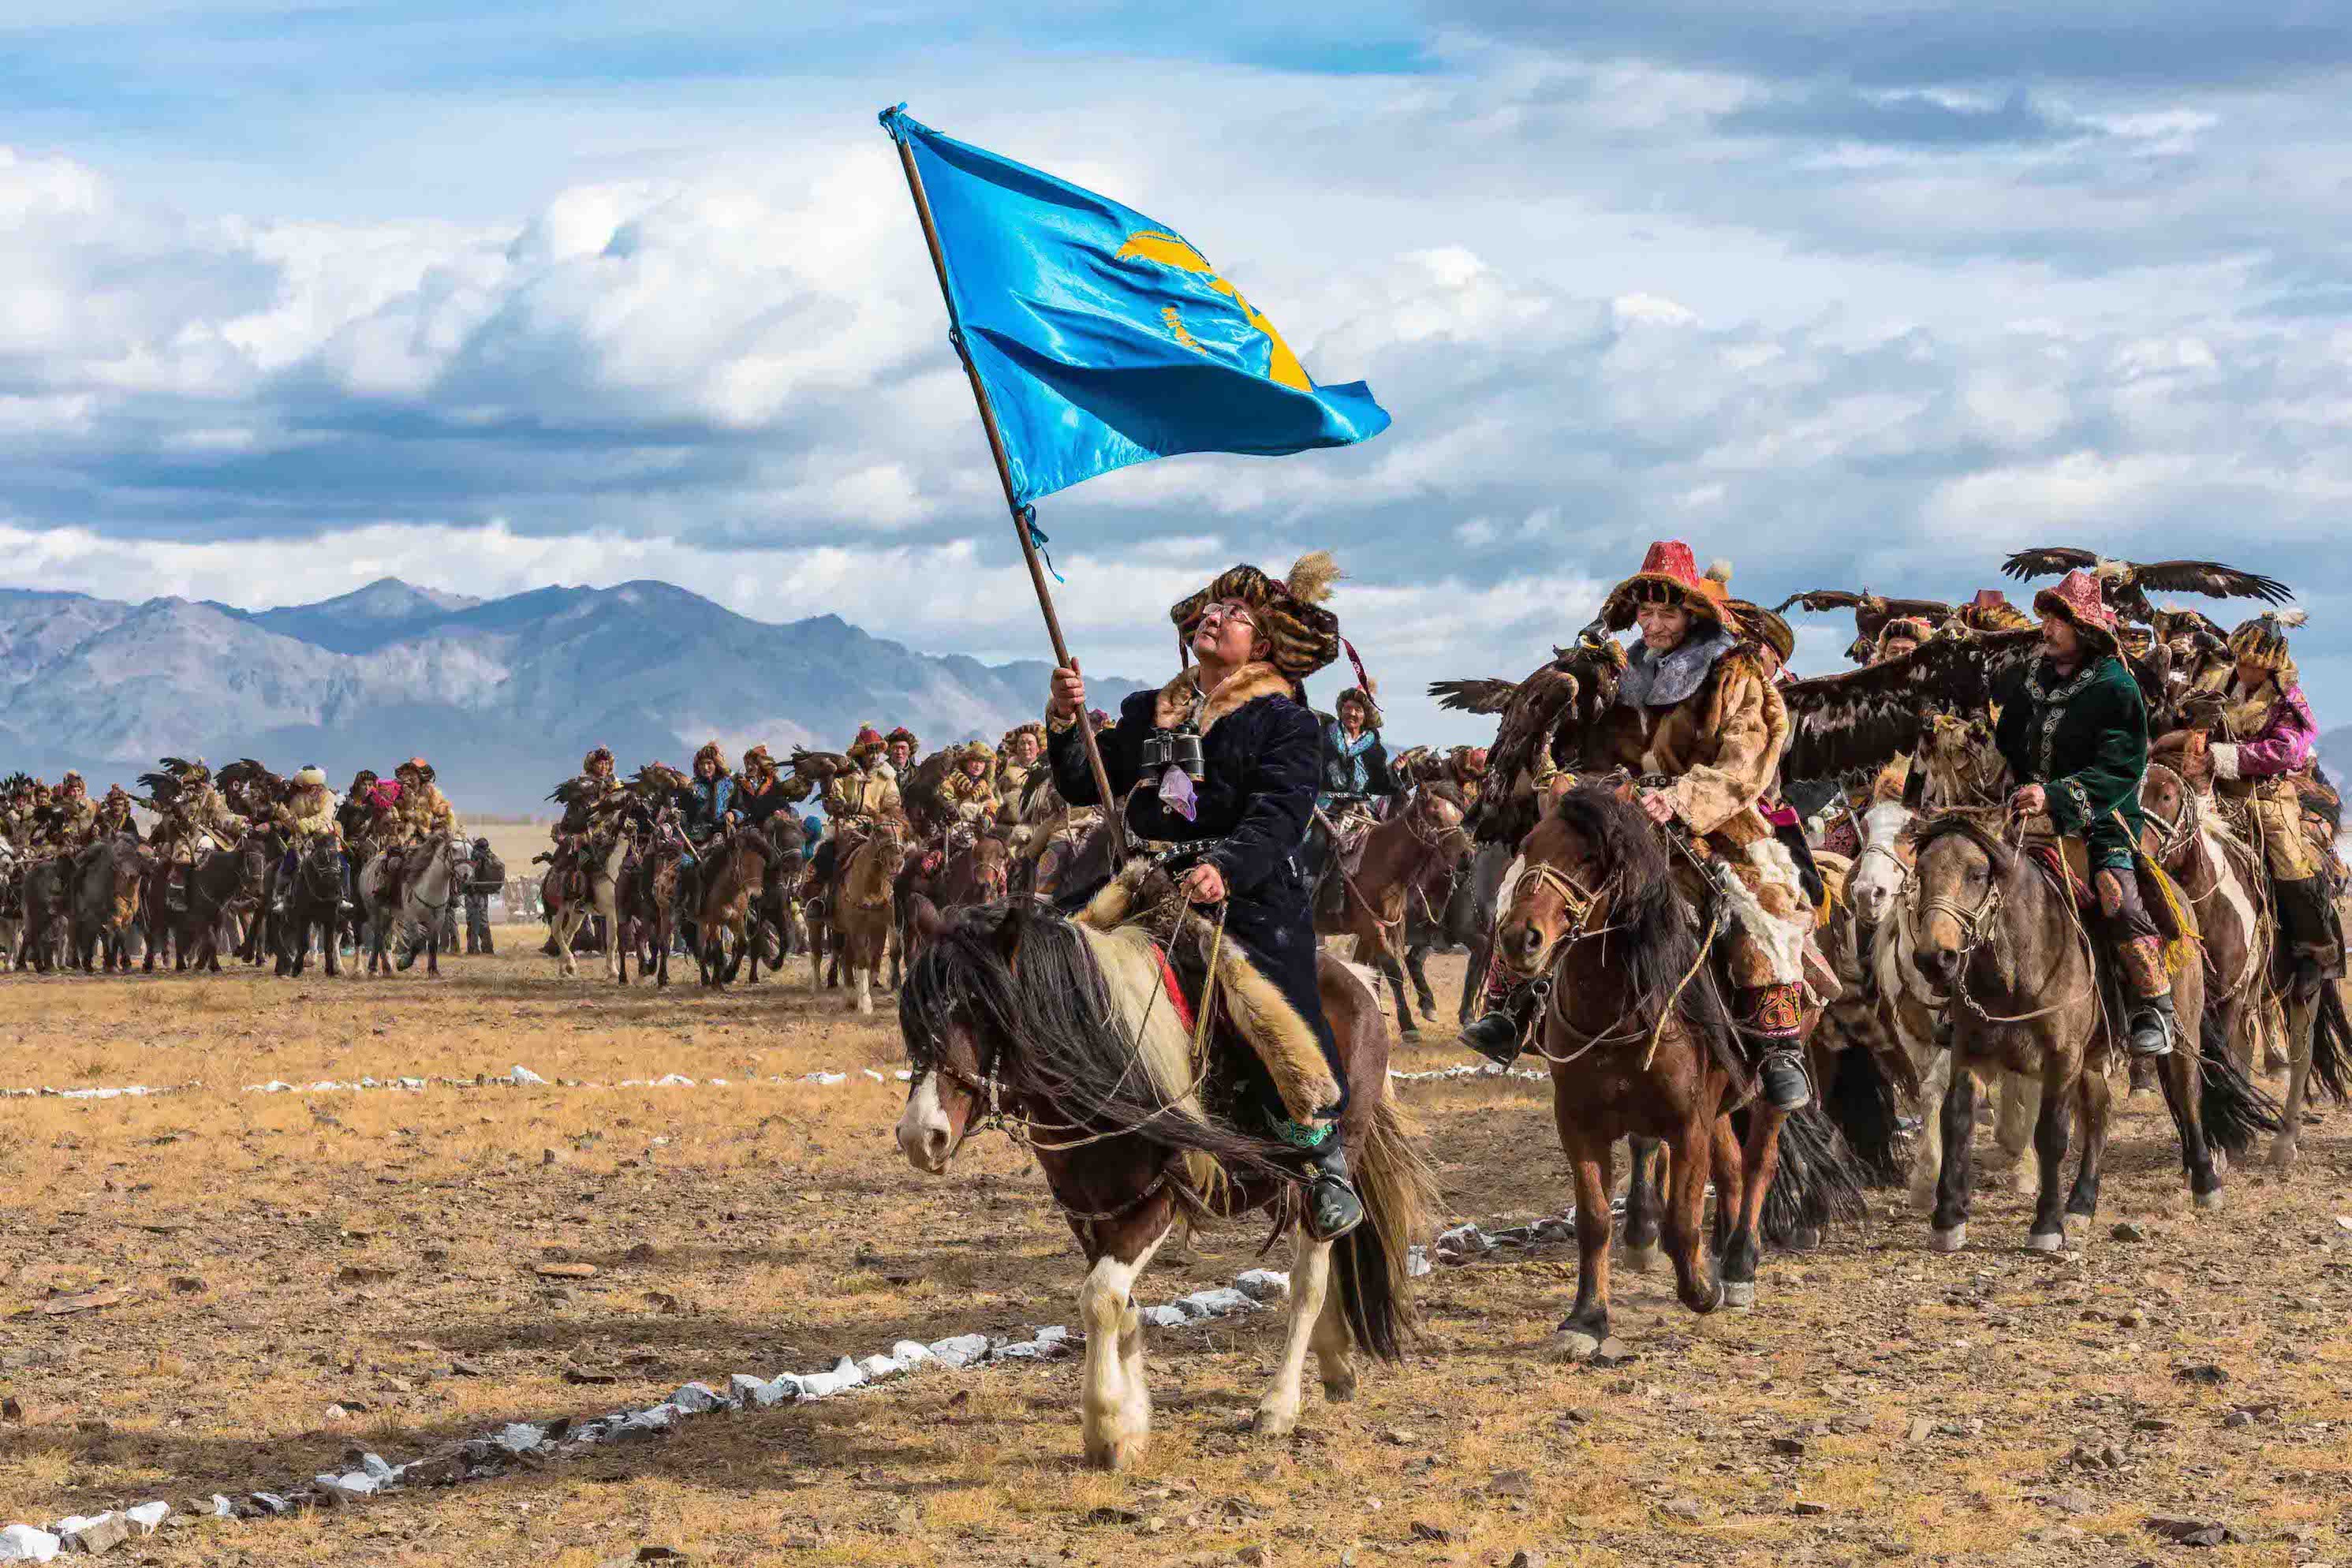 The parade of the Golden eagles marks the beginning of the two-day Golden Eagle Festival in Bayan-Ulgii, Mongolia.